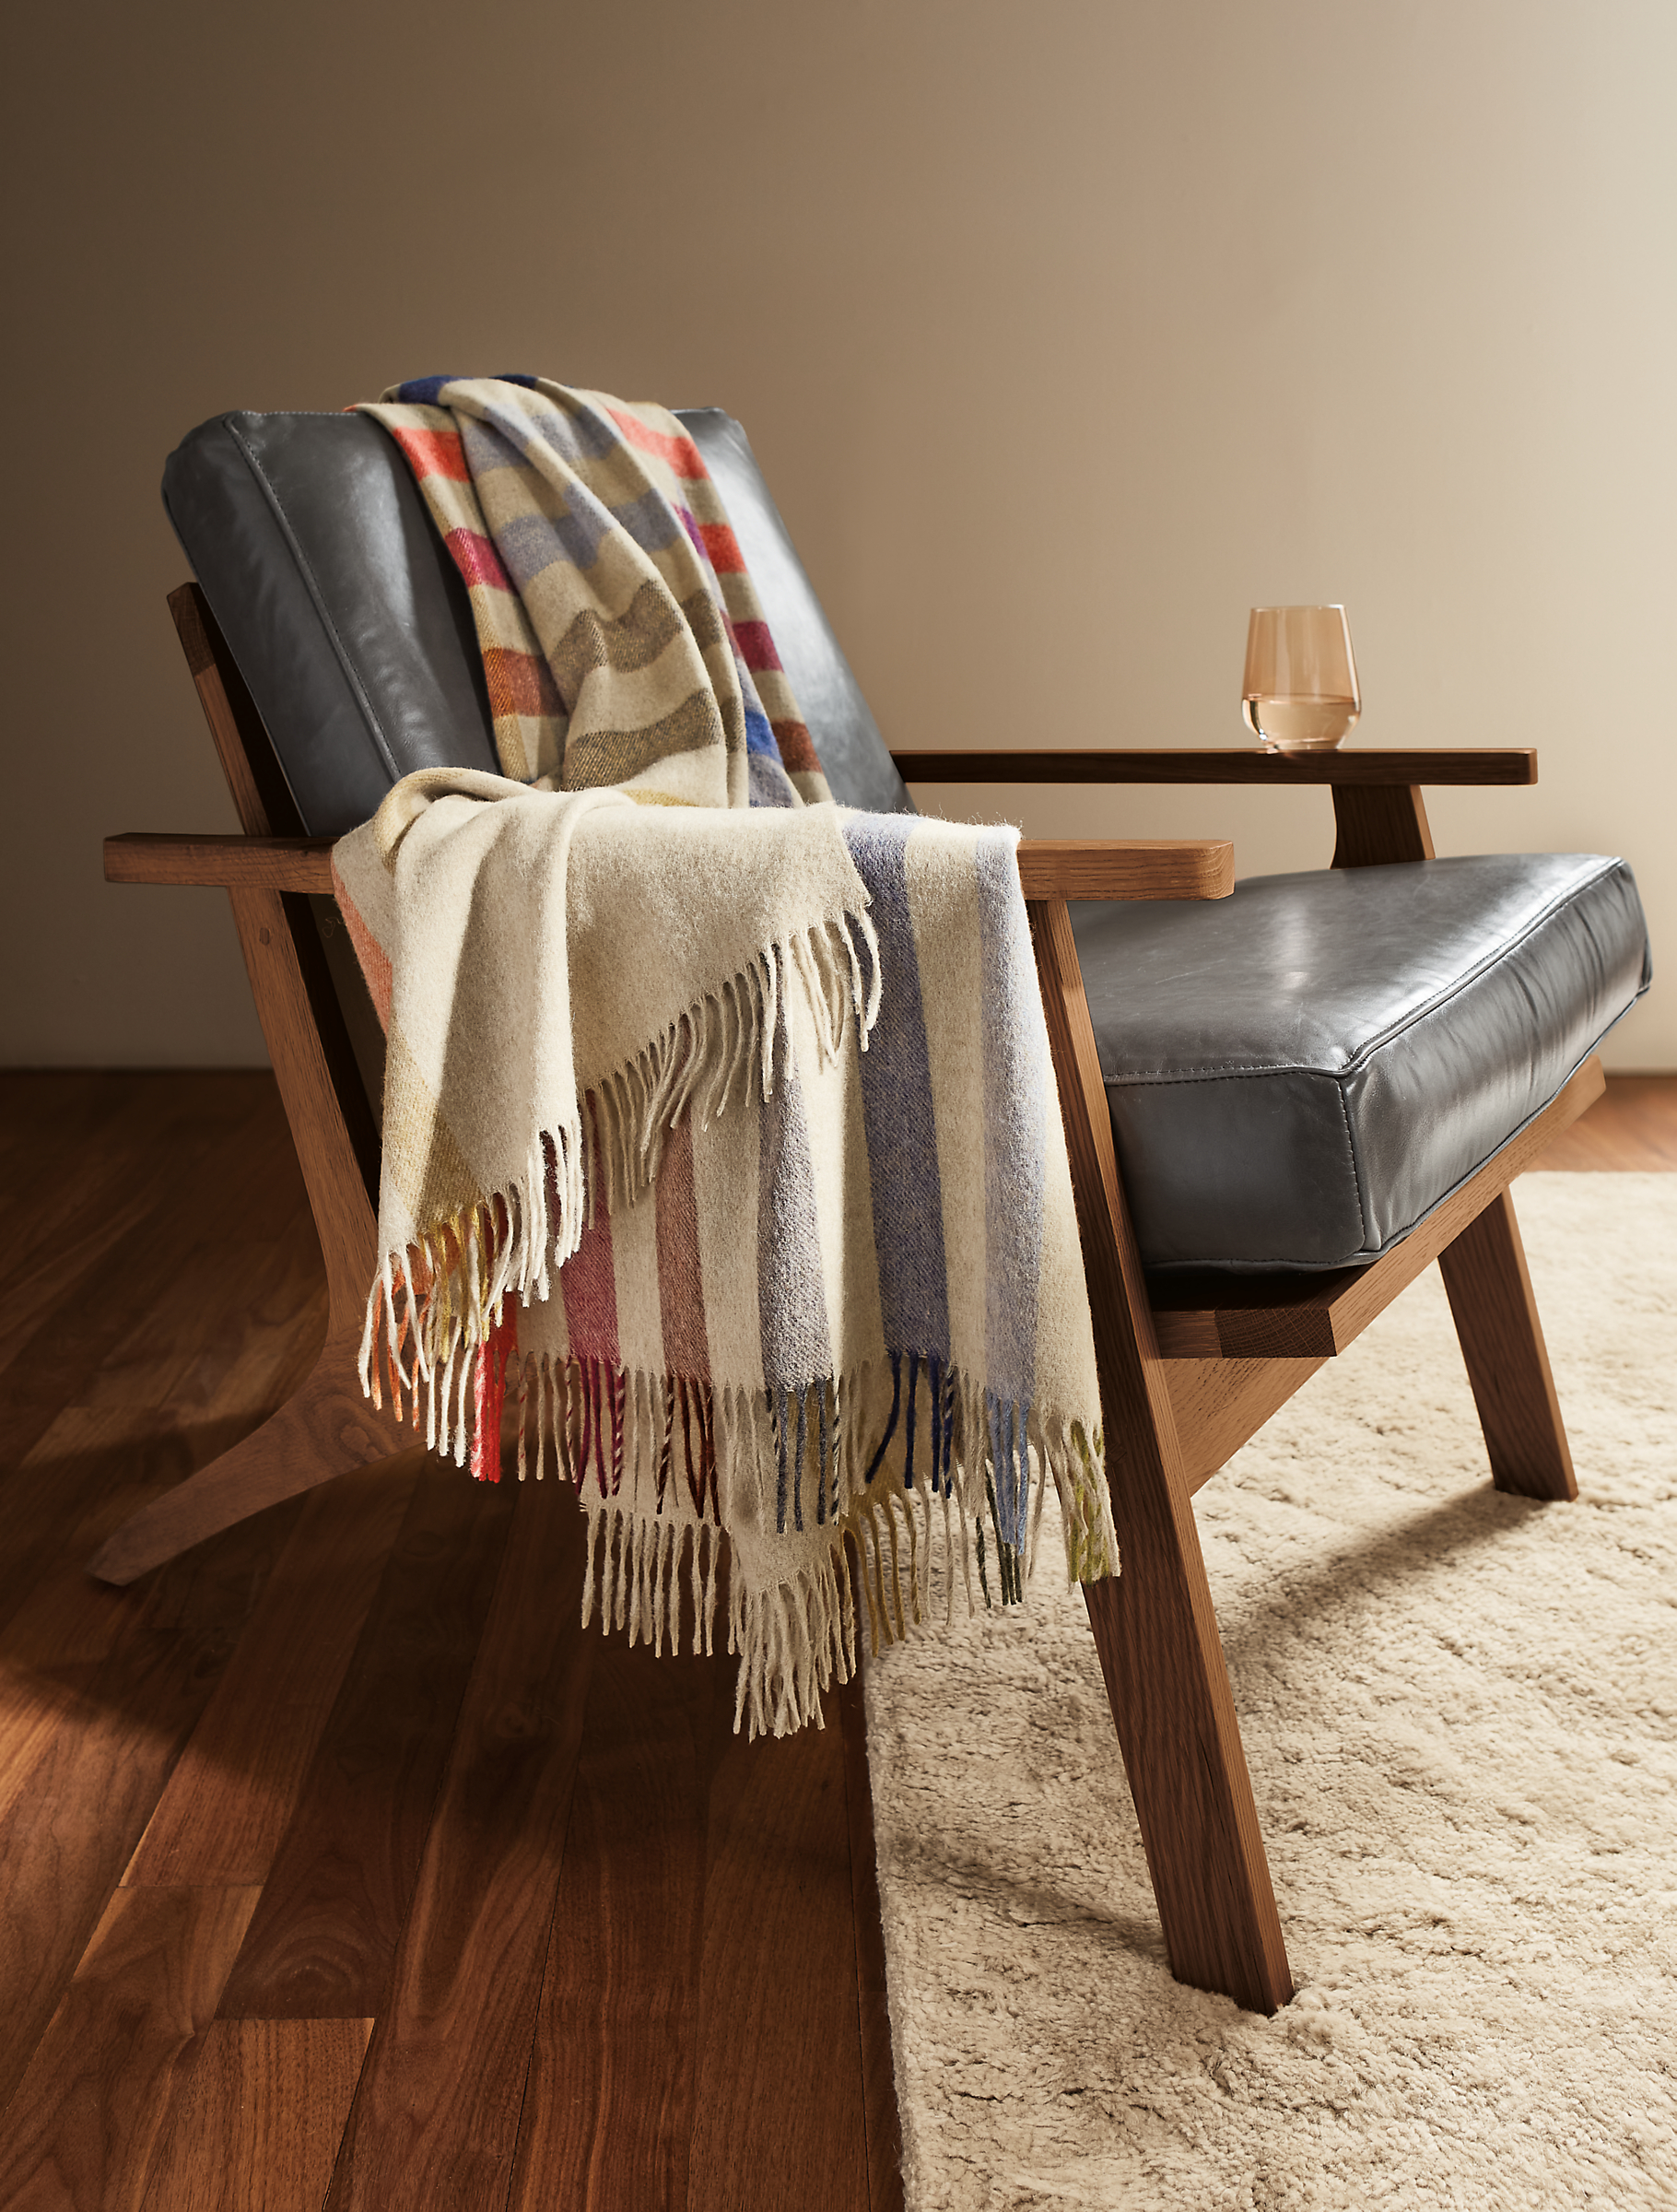 detail of audrey throw blanket draped on sanna chair in walnut and leather..